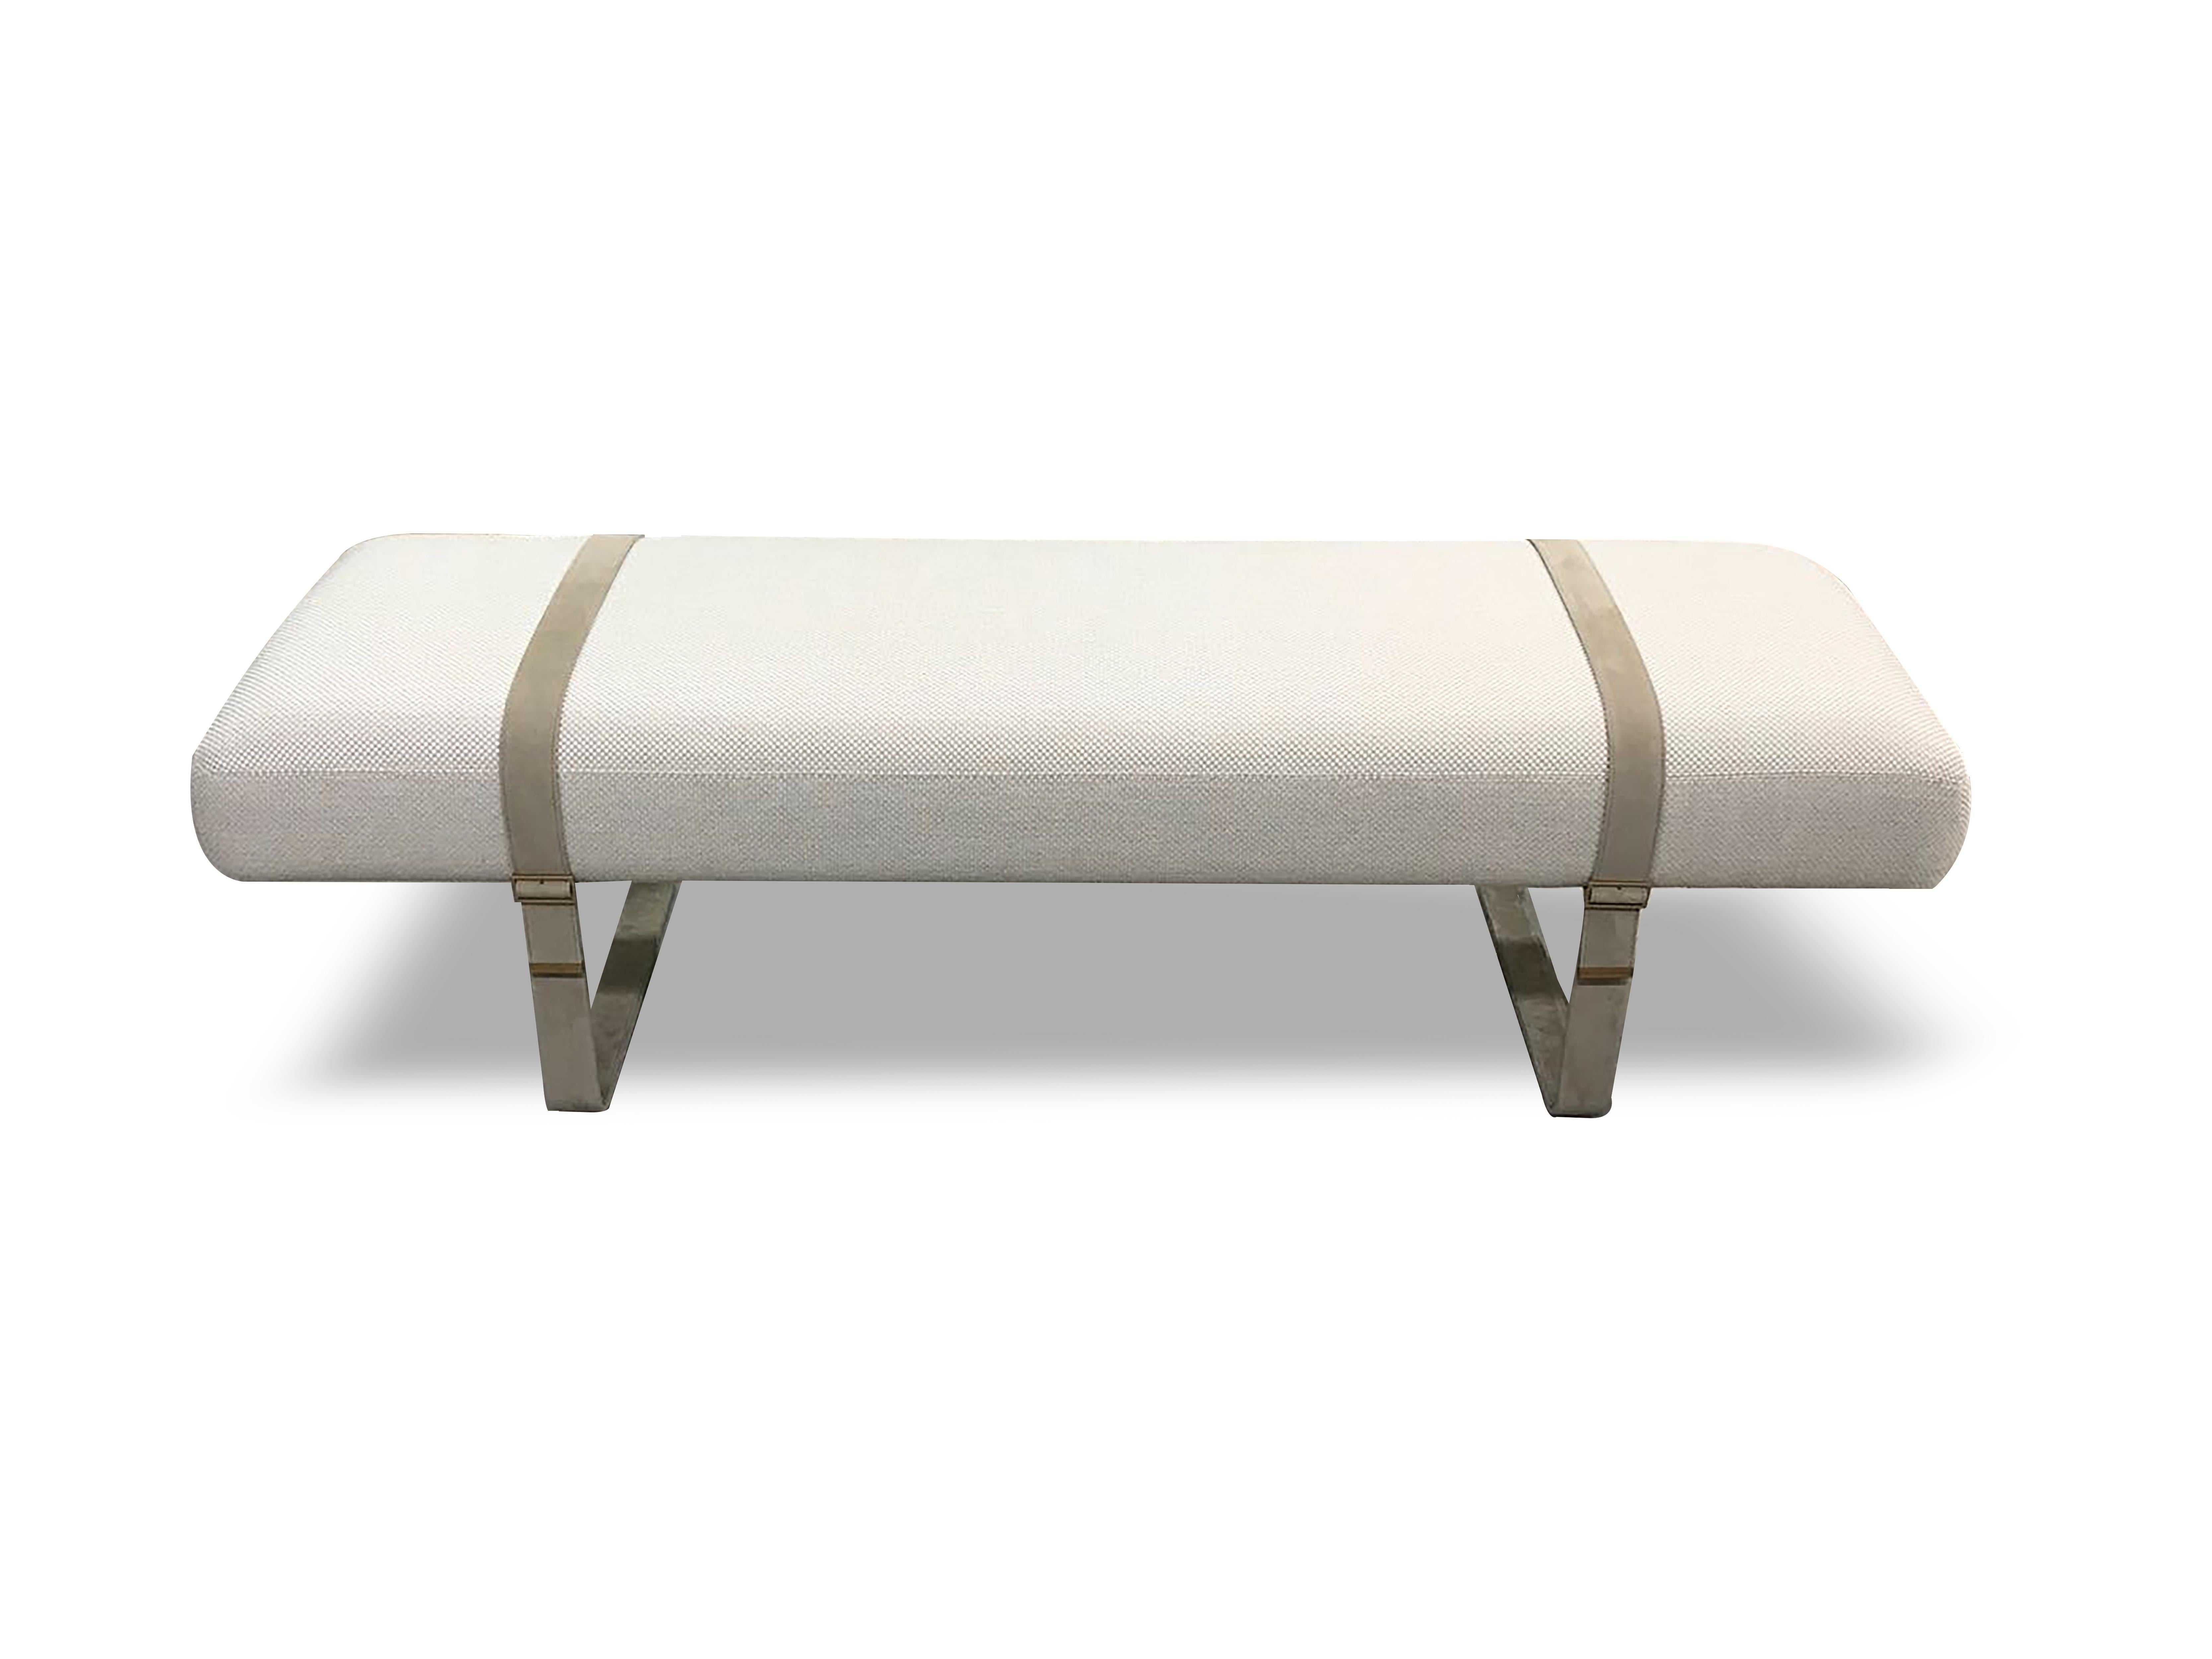 Inspired by the sensual fashion of Italy this modern leather bench lets you indulge in haute furniture design. The softly upholstered seat rests on two leather belts that wrap around the entire bench as the fashion-inspired design detail. 

As